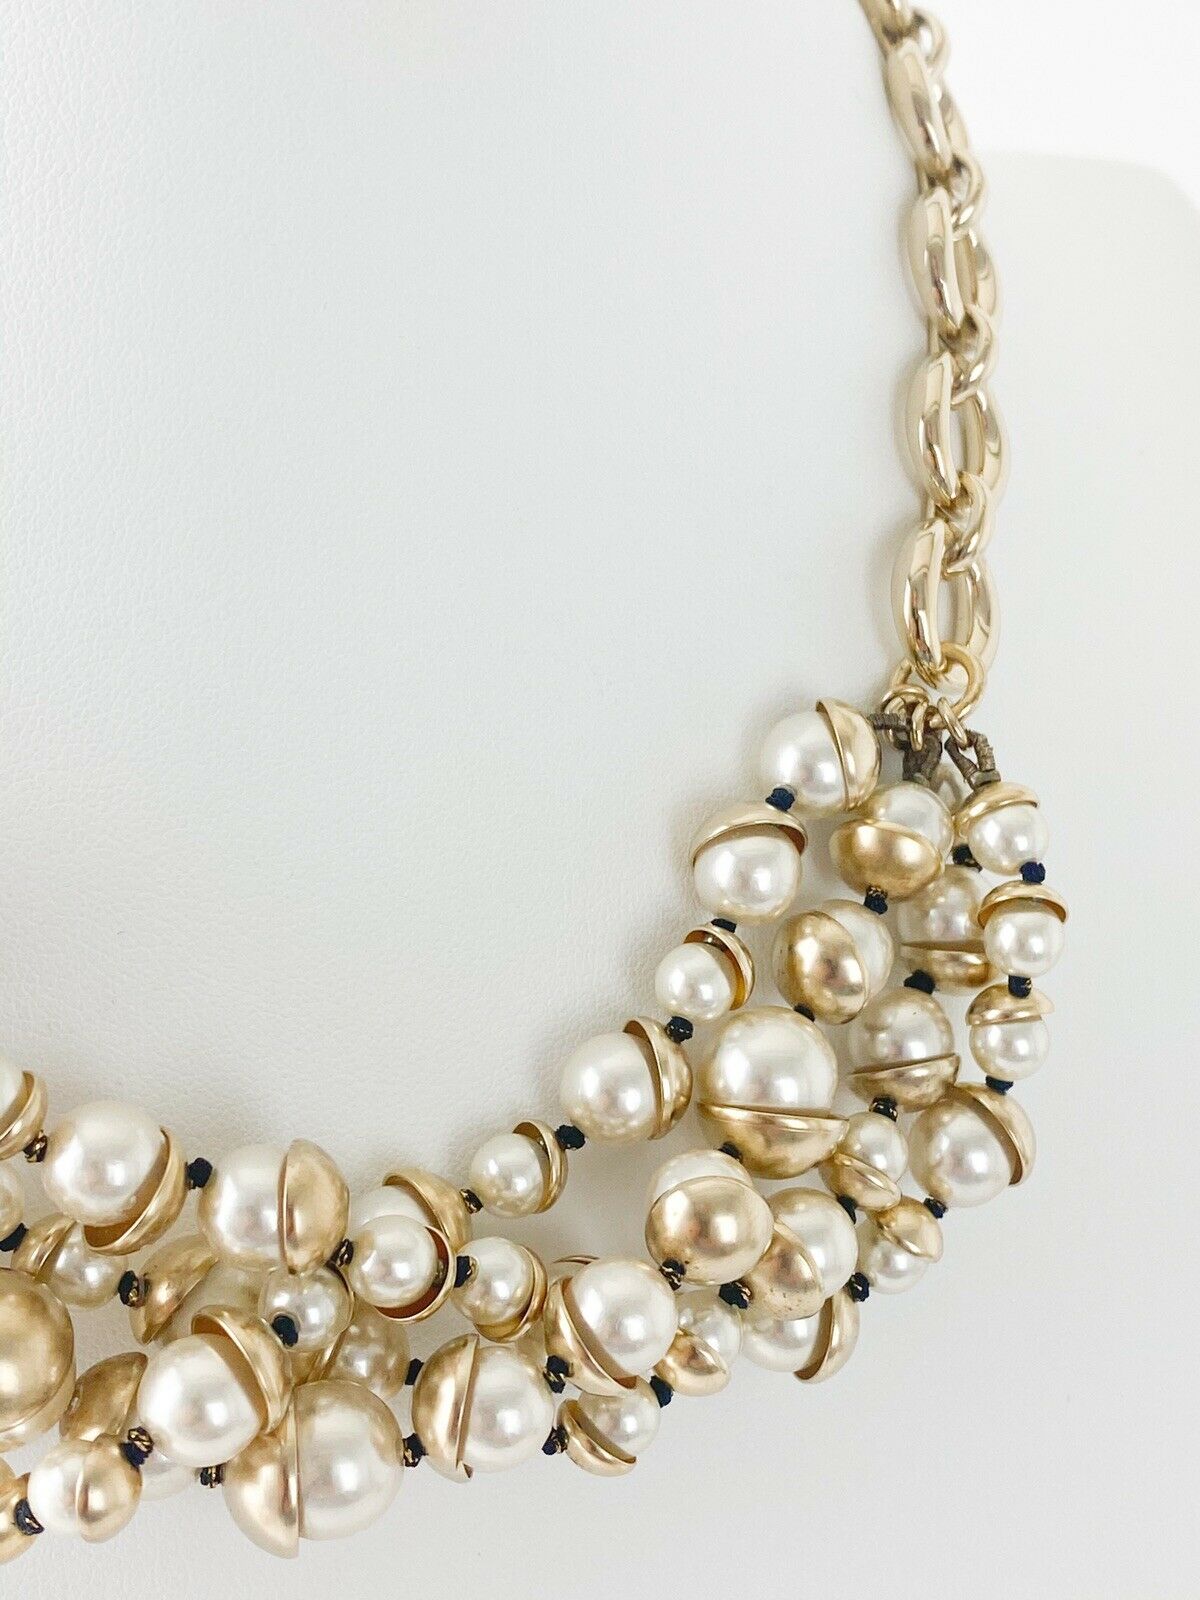 【SOLD OUT】Christian Dior Mise en Dior Vintage Gold Tone Multi-Strand Choker Necklace Faux Pearl